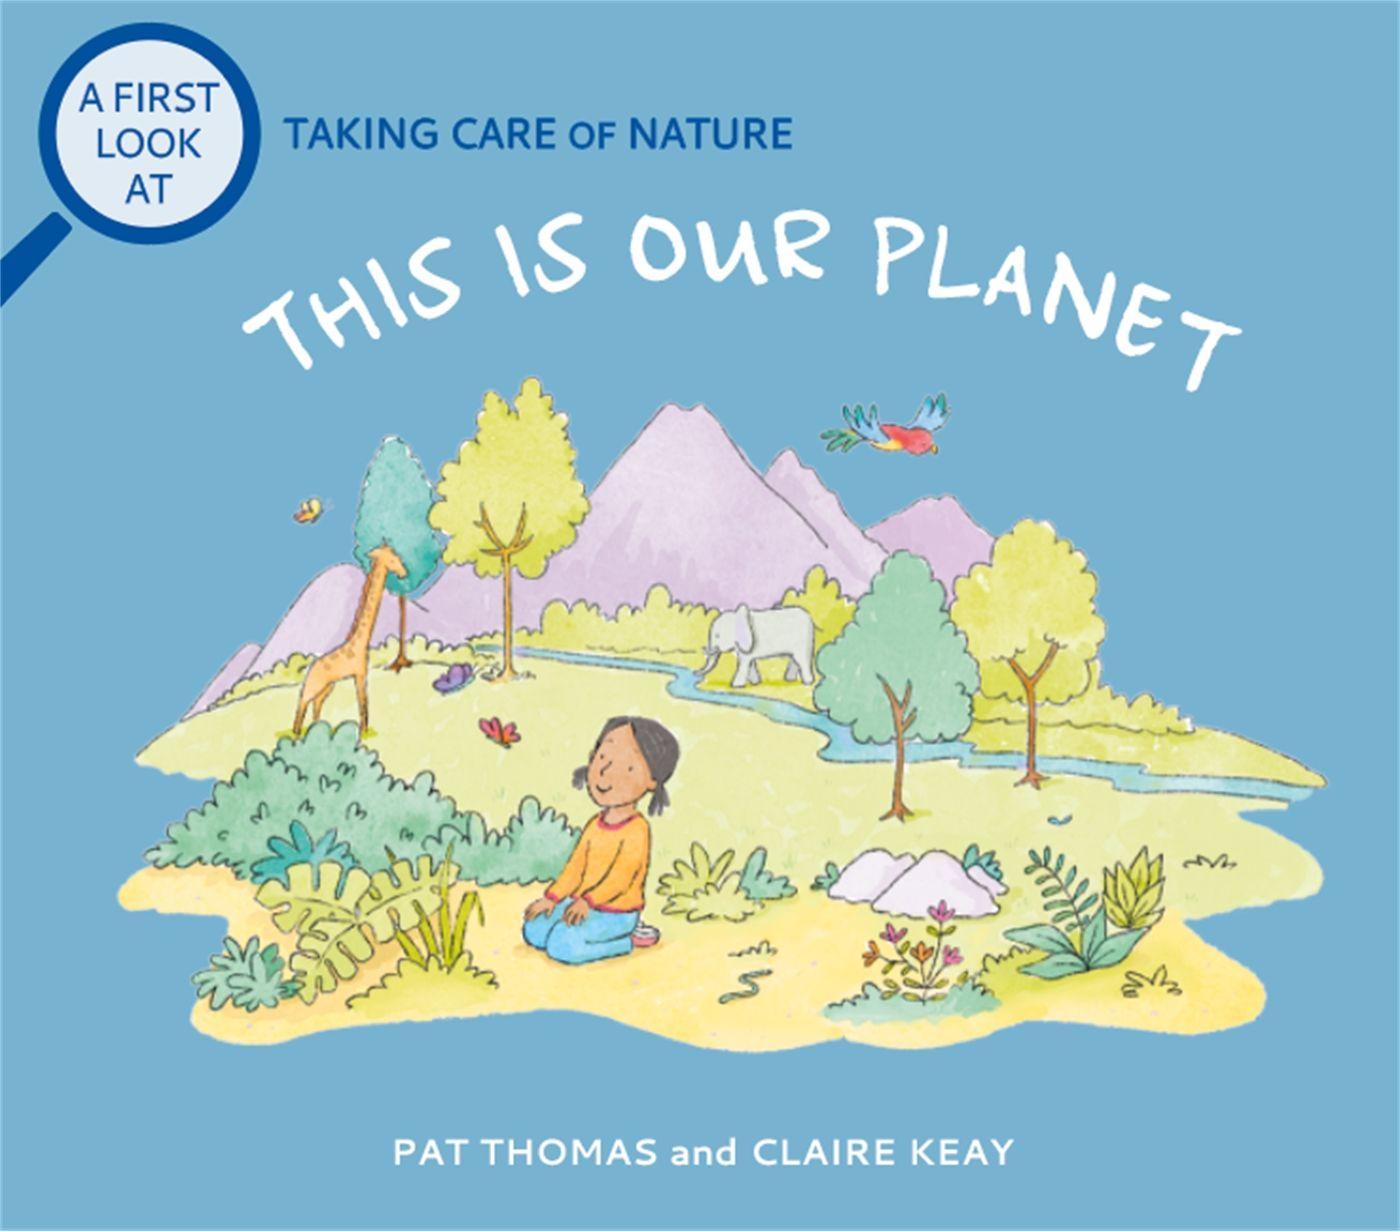 Kniha First Look At: Taking Care of Nature: This is our Planet PAT THOMAS